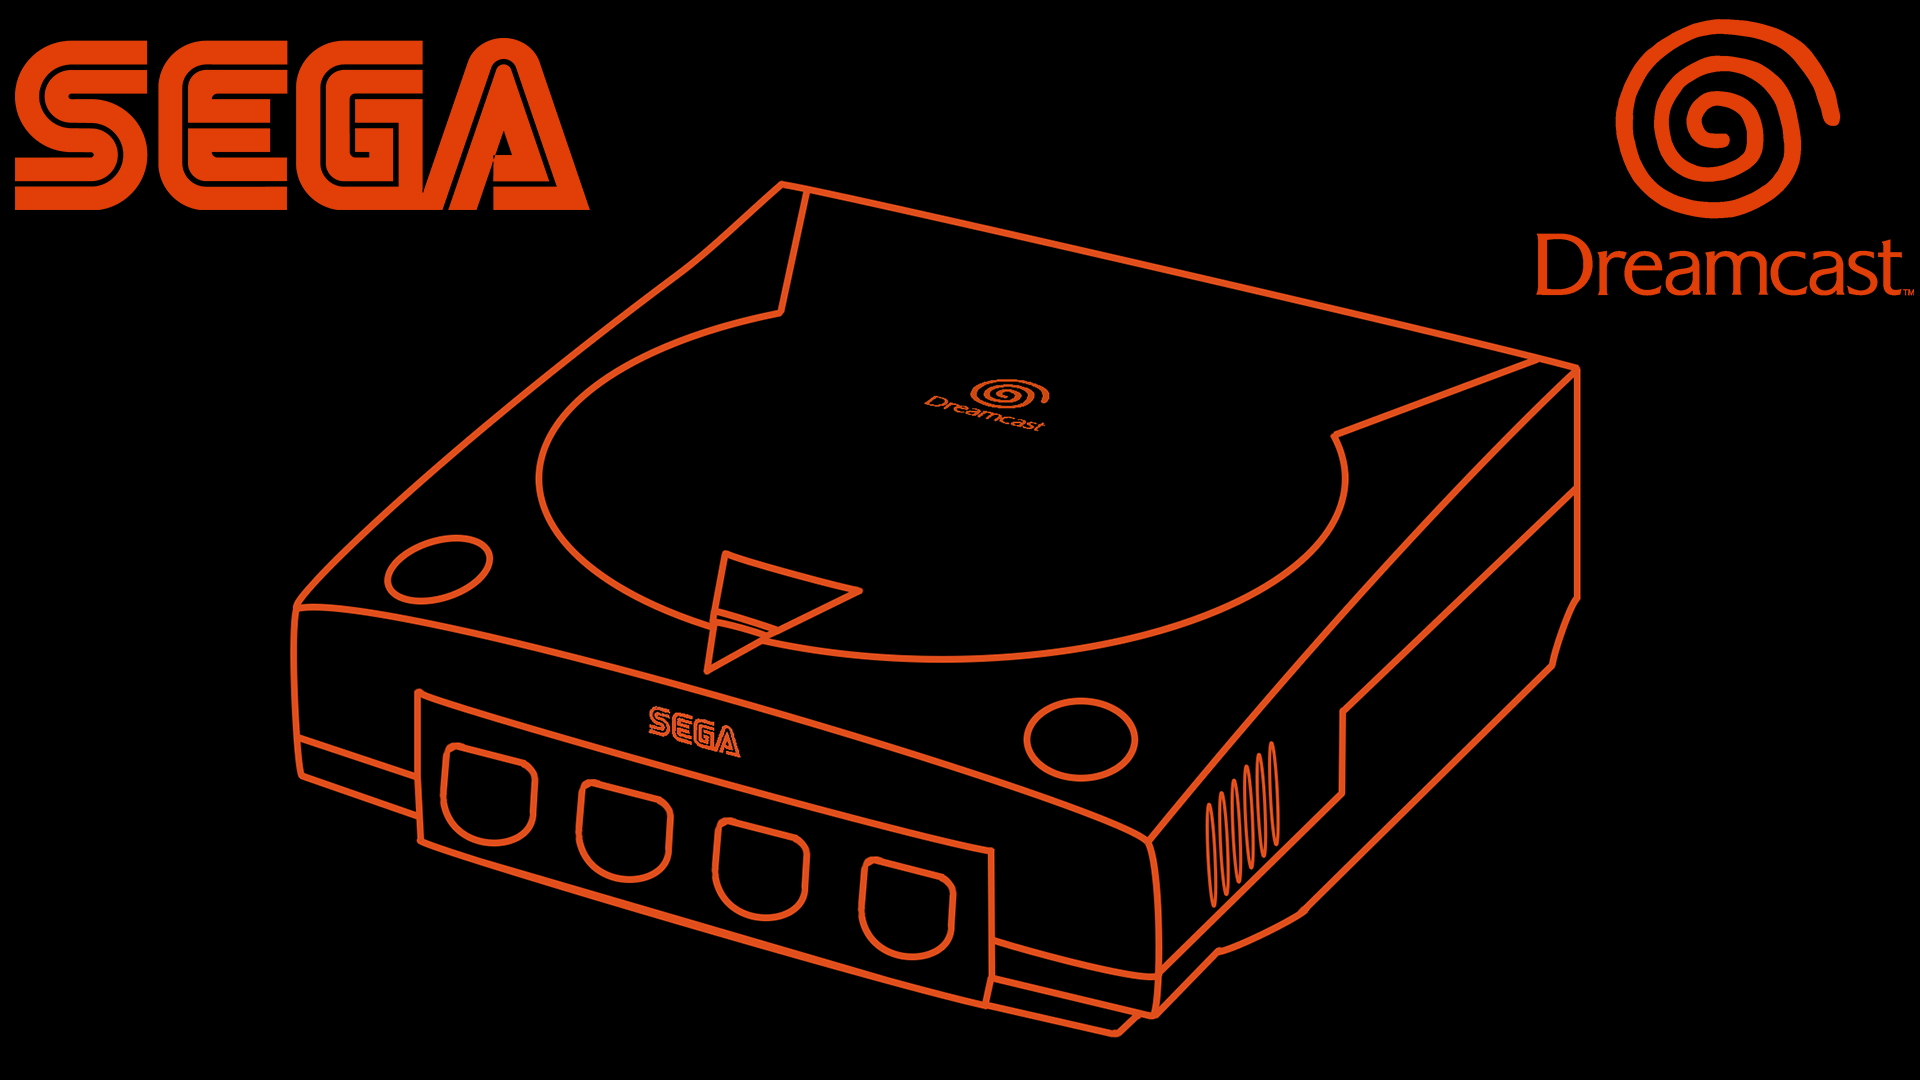 Made these Dreamcast wallpaper! Hope you like them :) Google Drive link in the comments